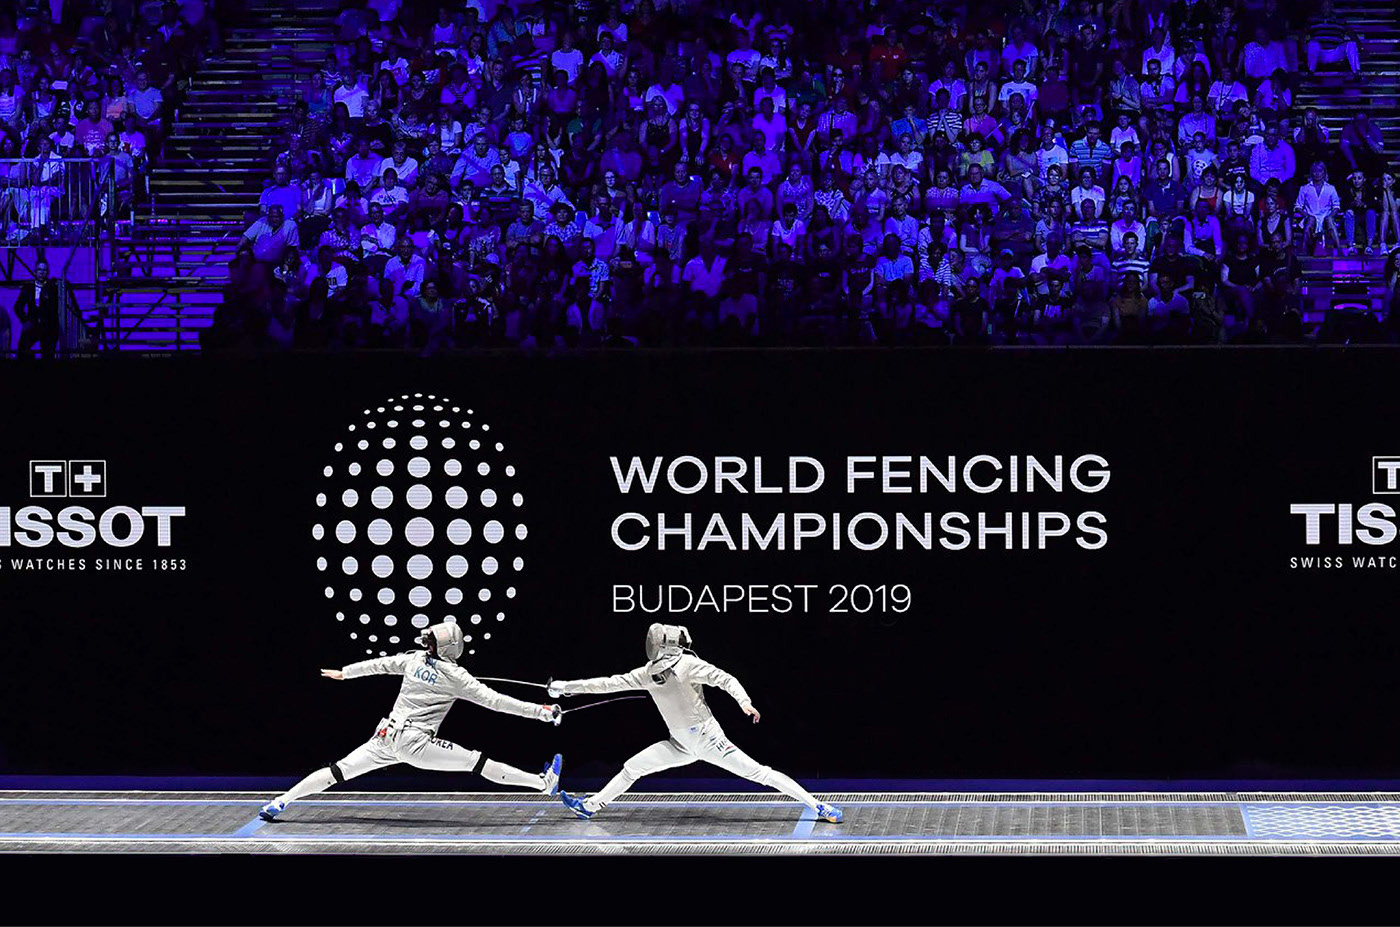 2019 World Fencing Championships Event Graphics 01 